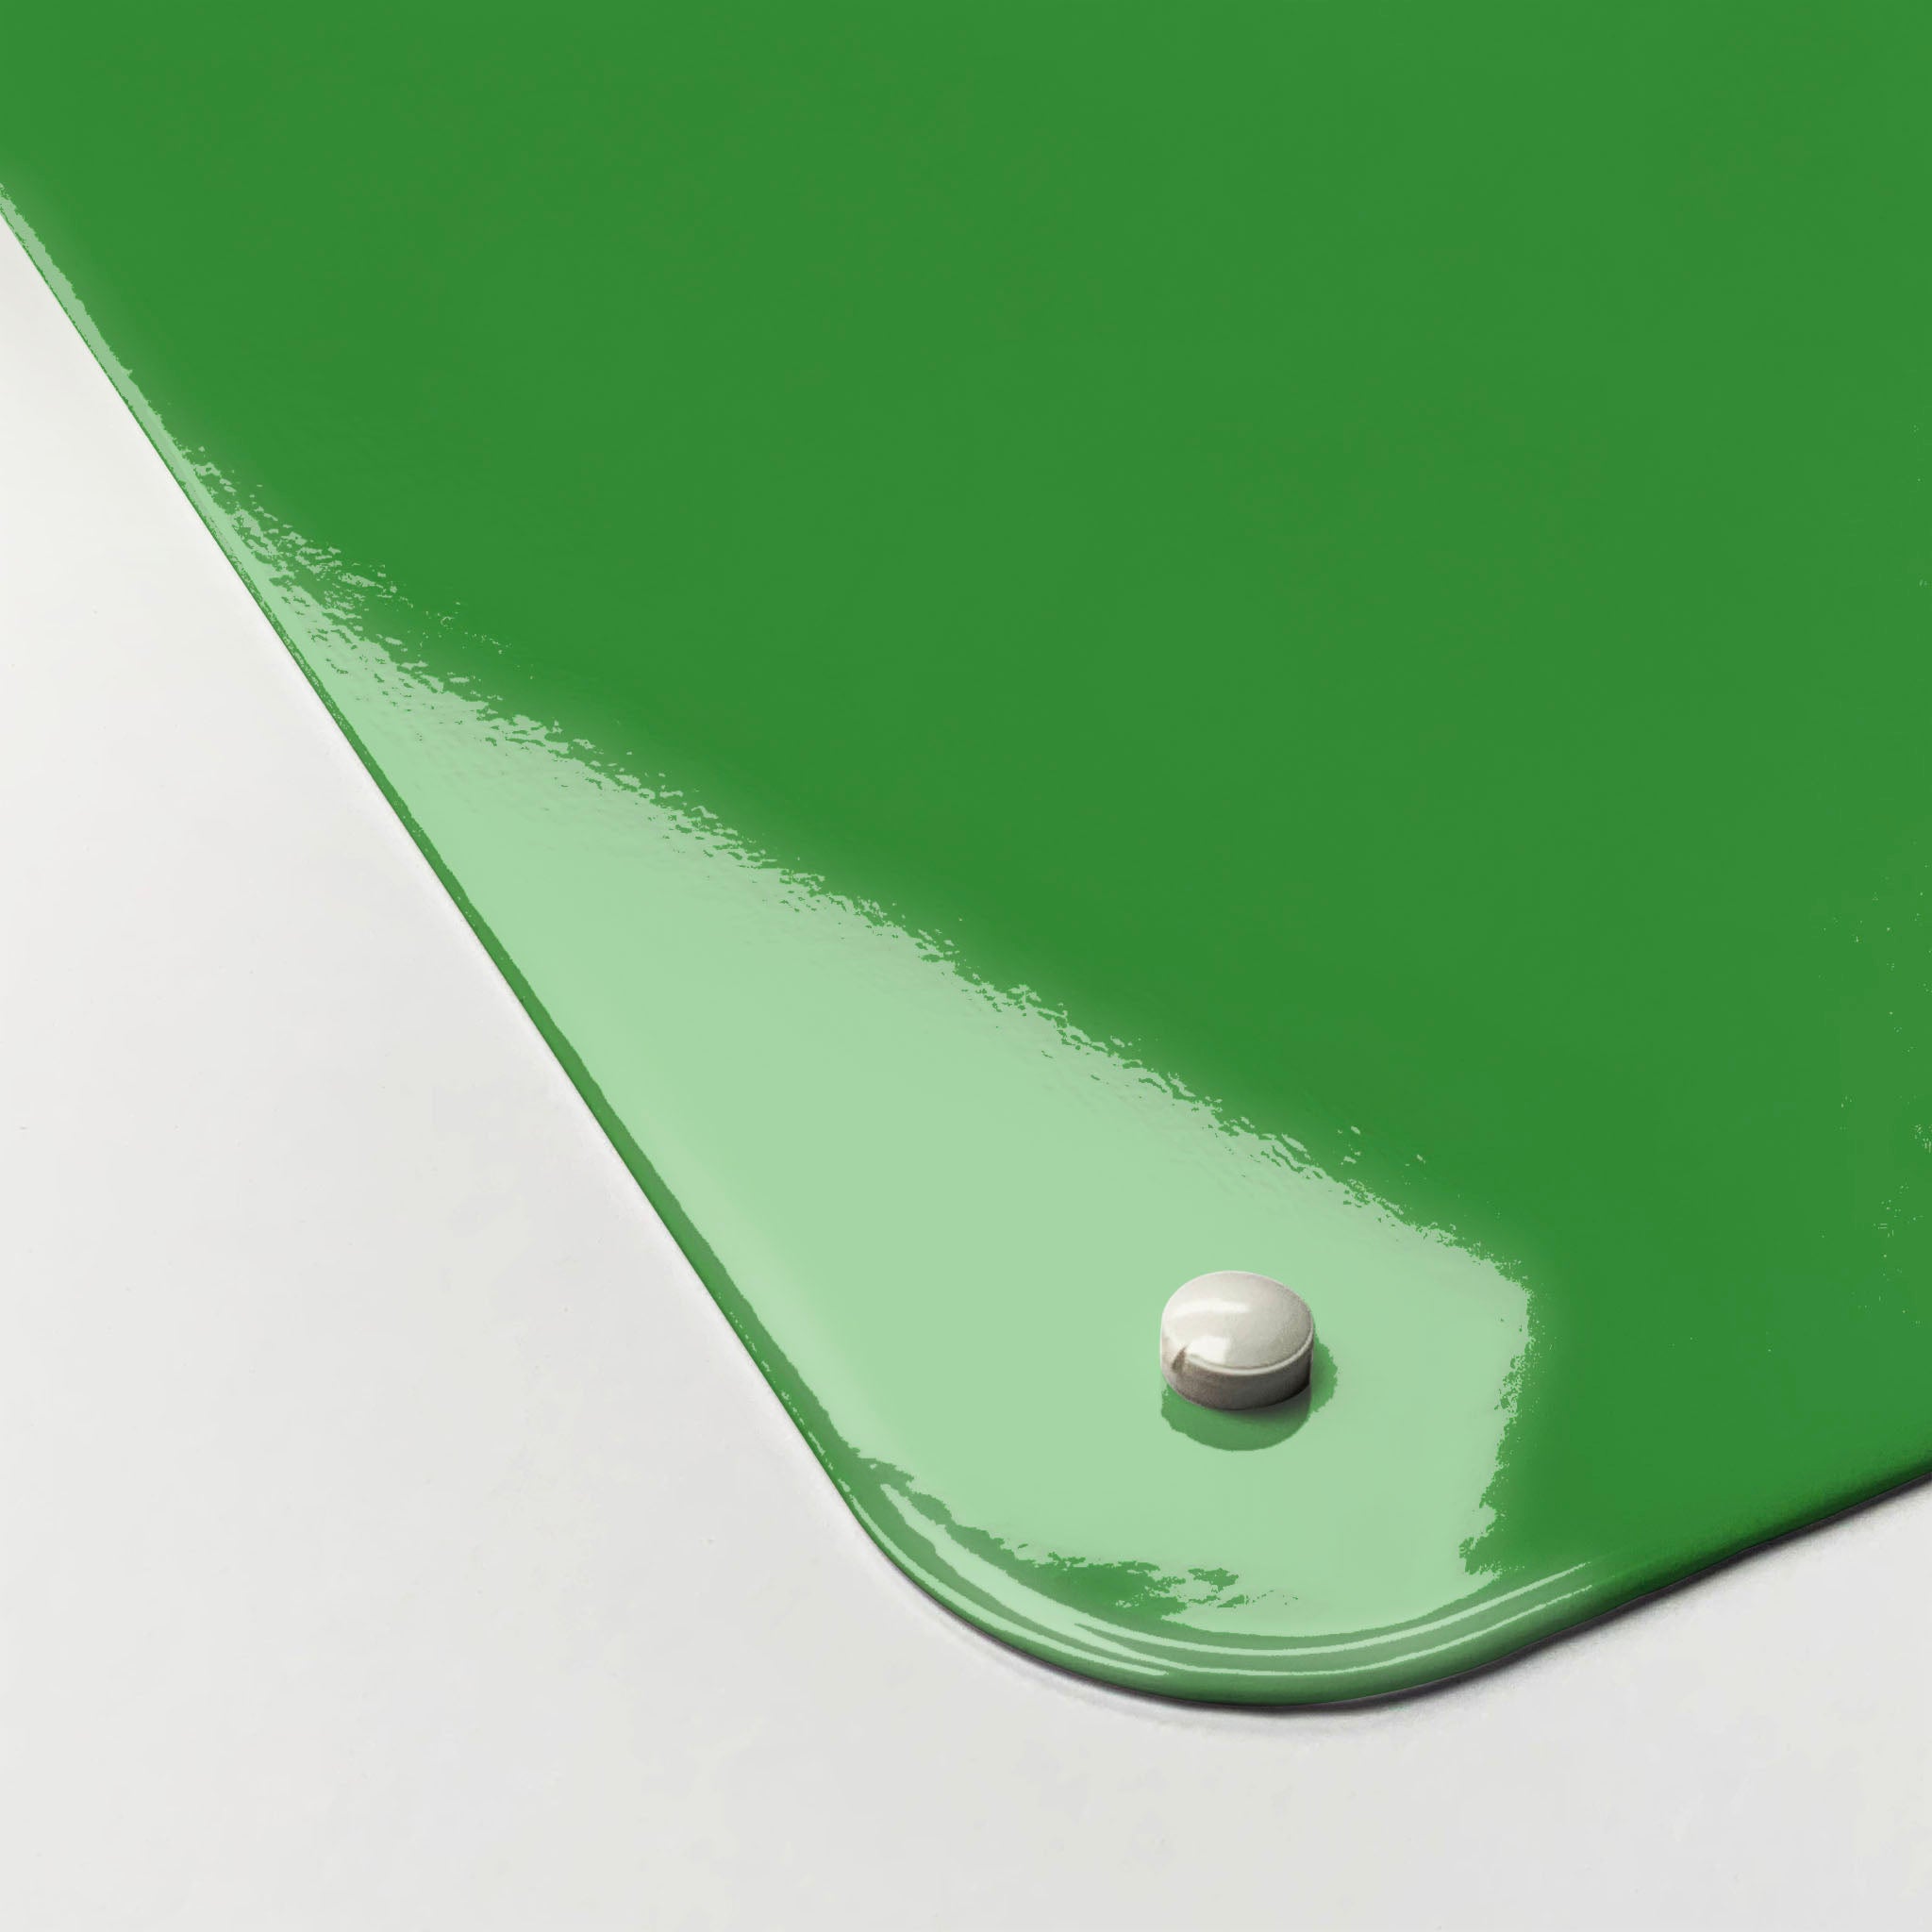 The corner detail of a green keep calm and carry on magnetic board to show it’s high gloss surface